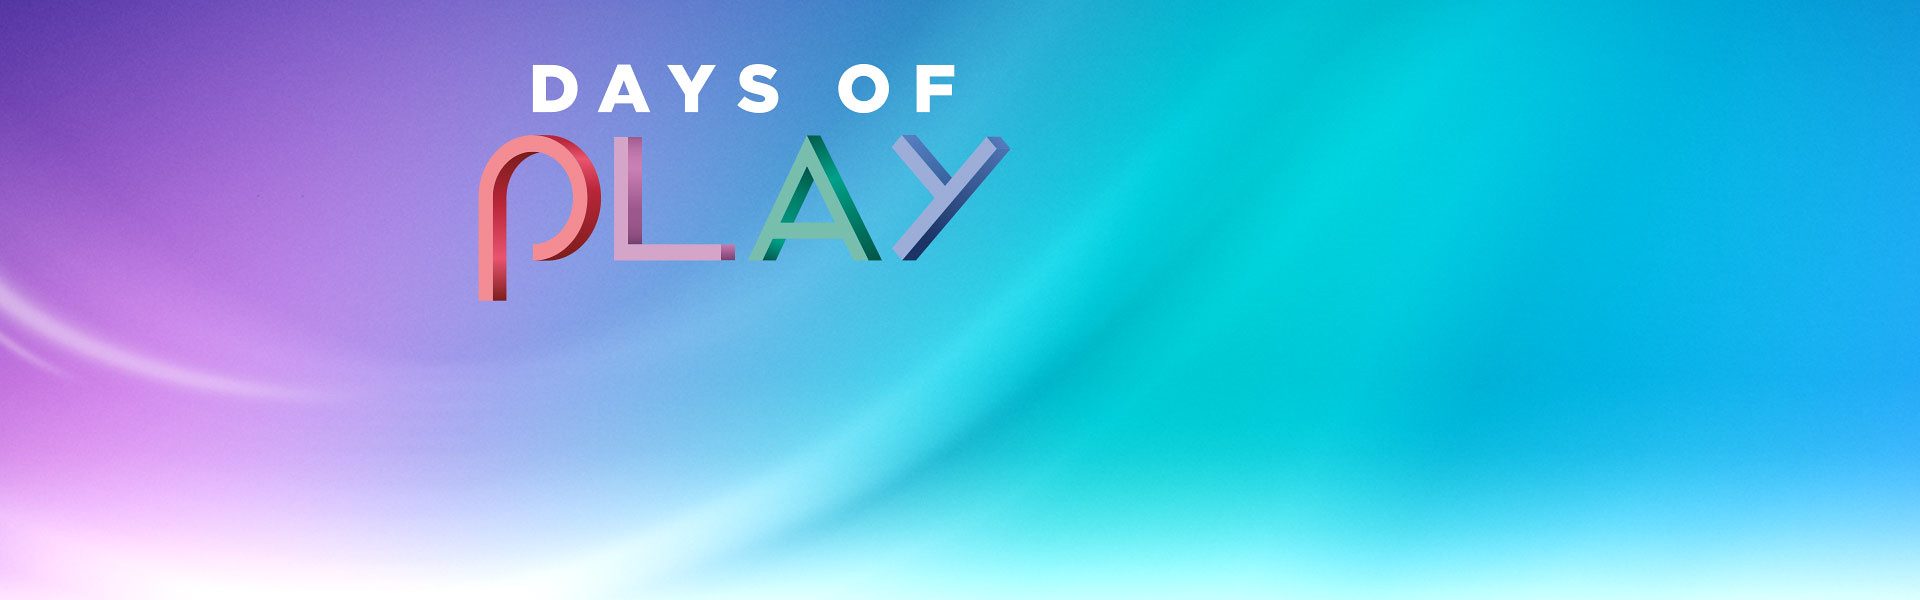 days of play deals 2020